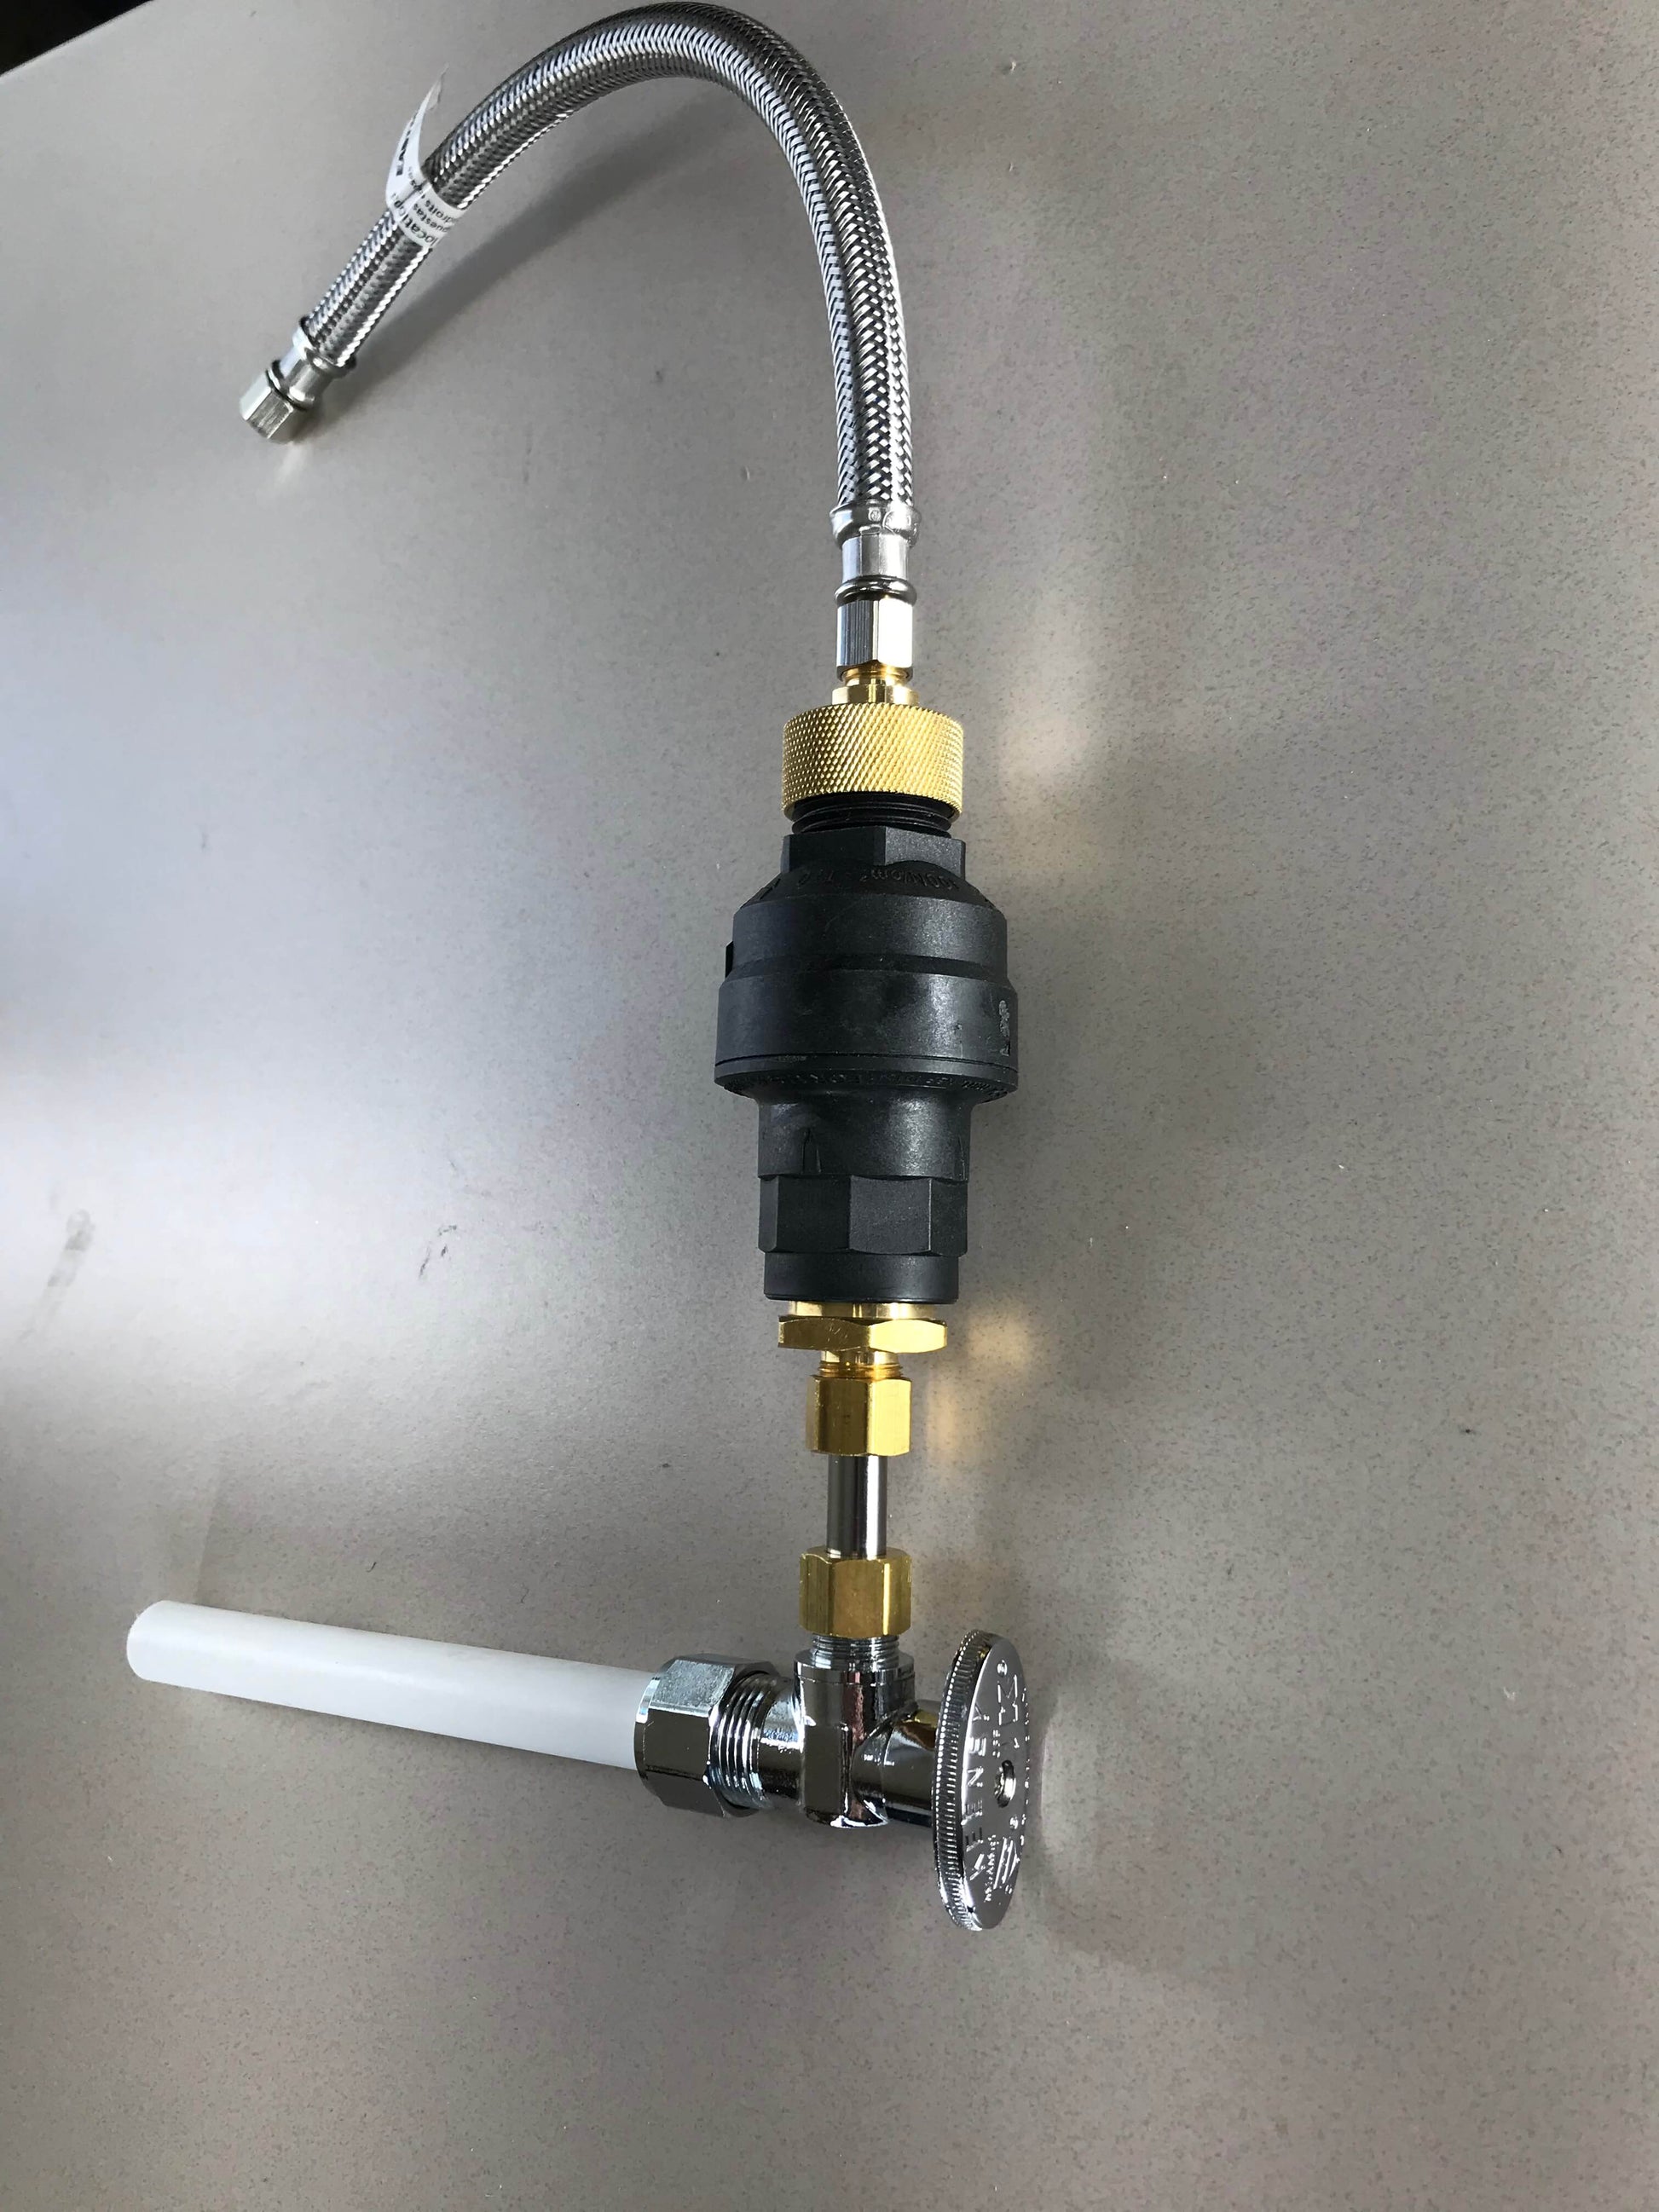 Water Block 1/4" shutoff kit configuration connected to a 1/4" stainless steel hose and a 1/4" supply valve.